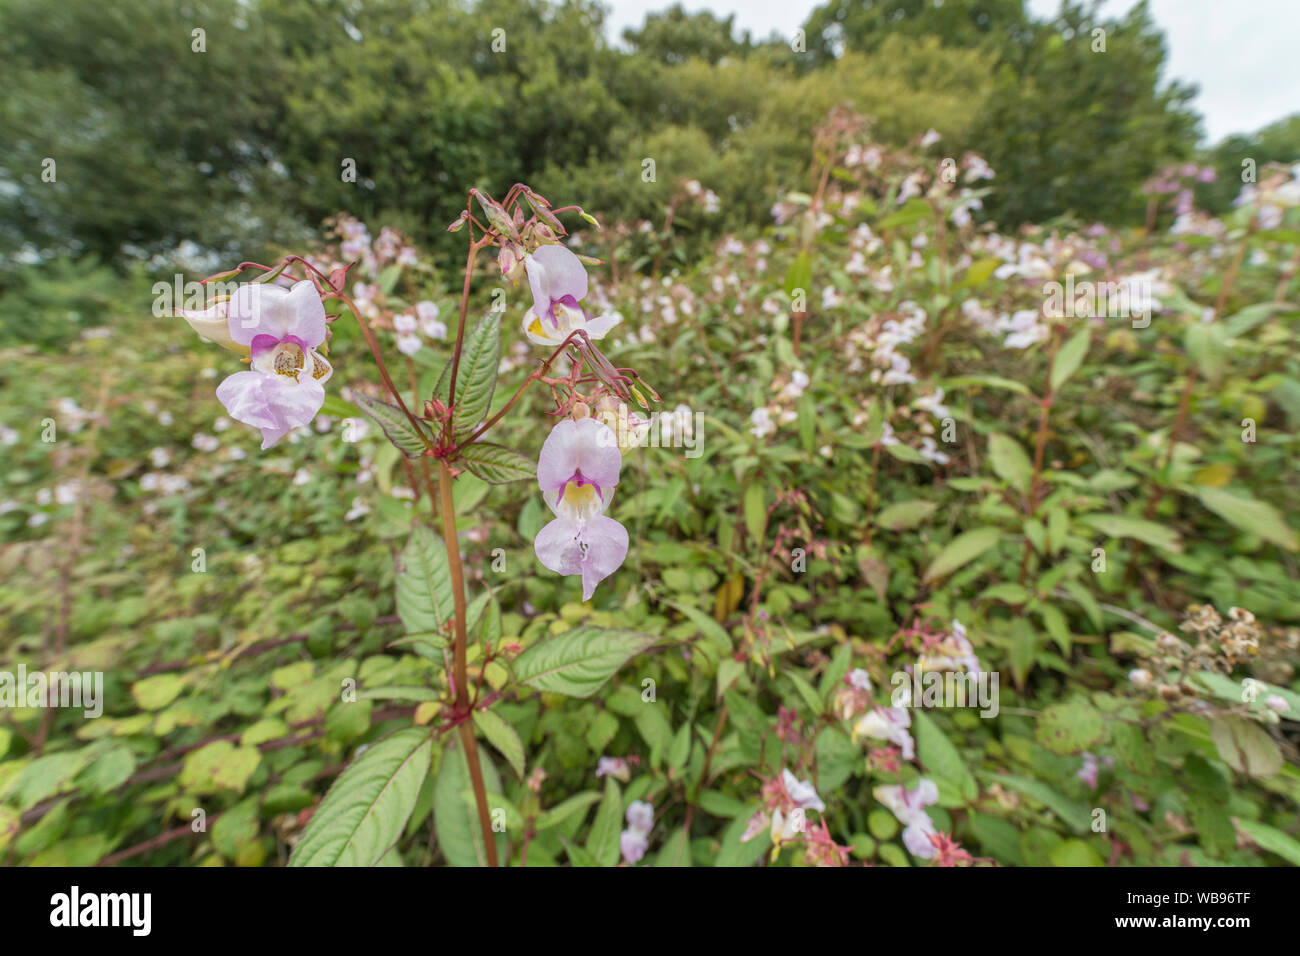 Flowers and upper leaves of a troublesome Himalayan Balsam / Impatiens glandulifera weed patch. Likes damp soils / ground. Himalayan balsam invasion. Stock Photo